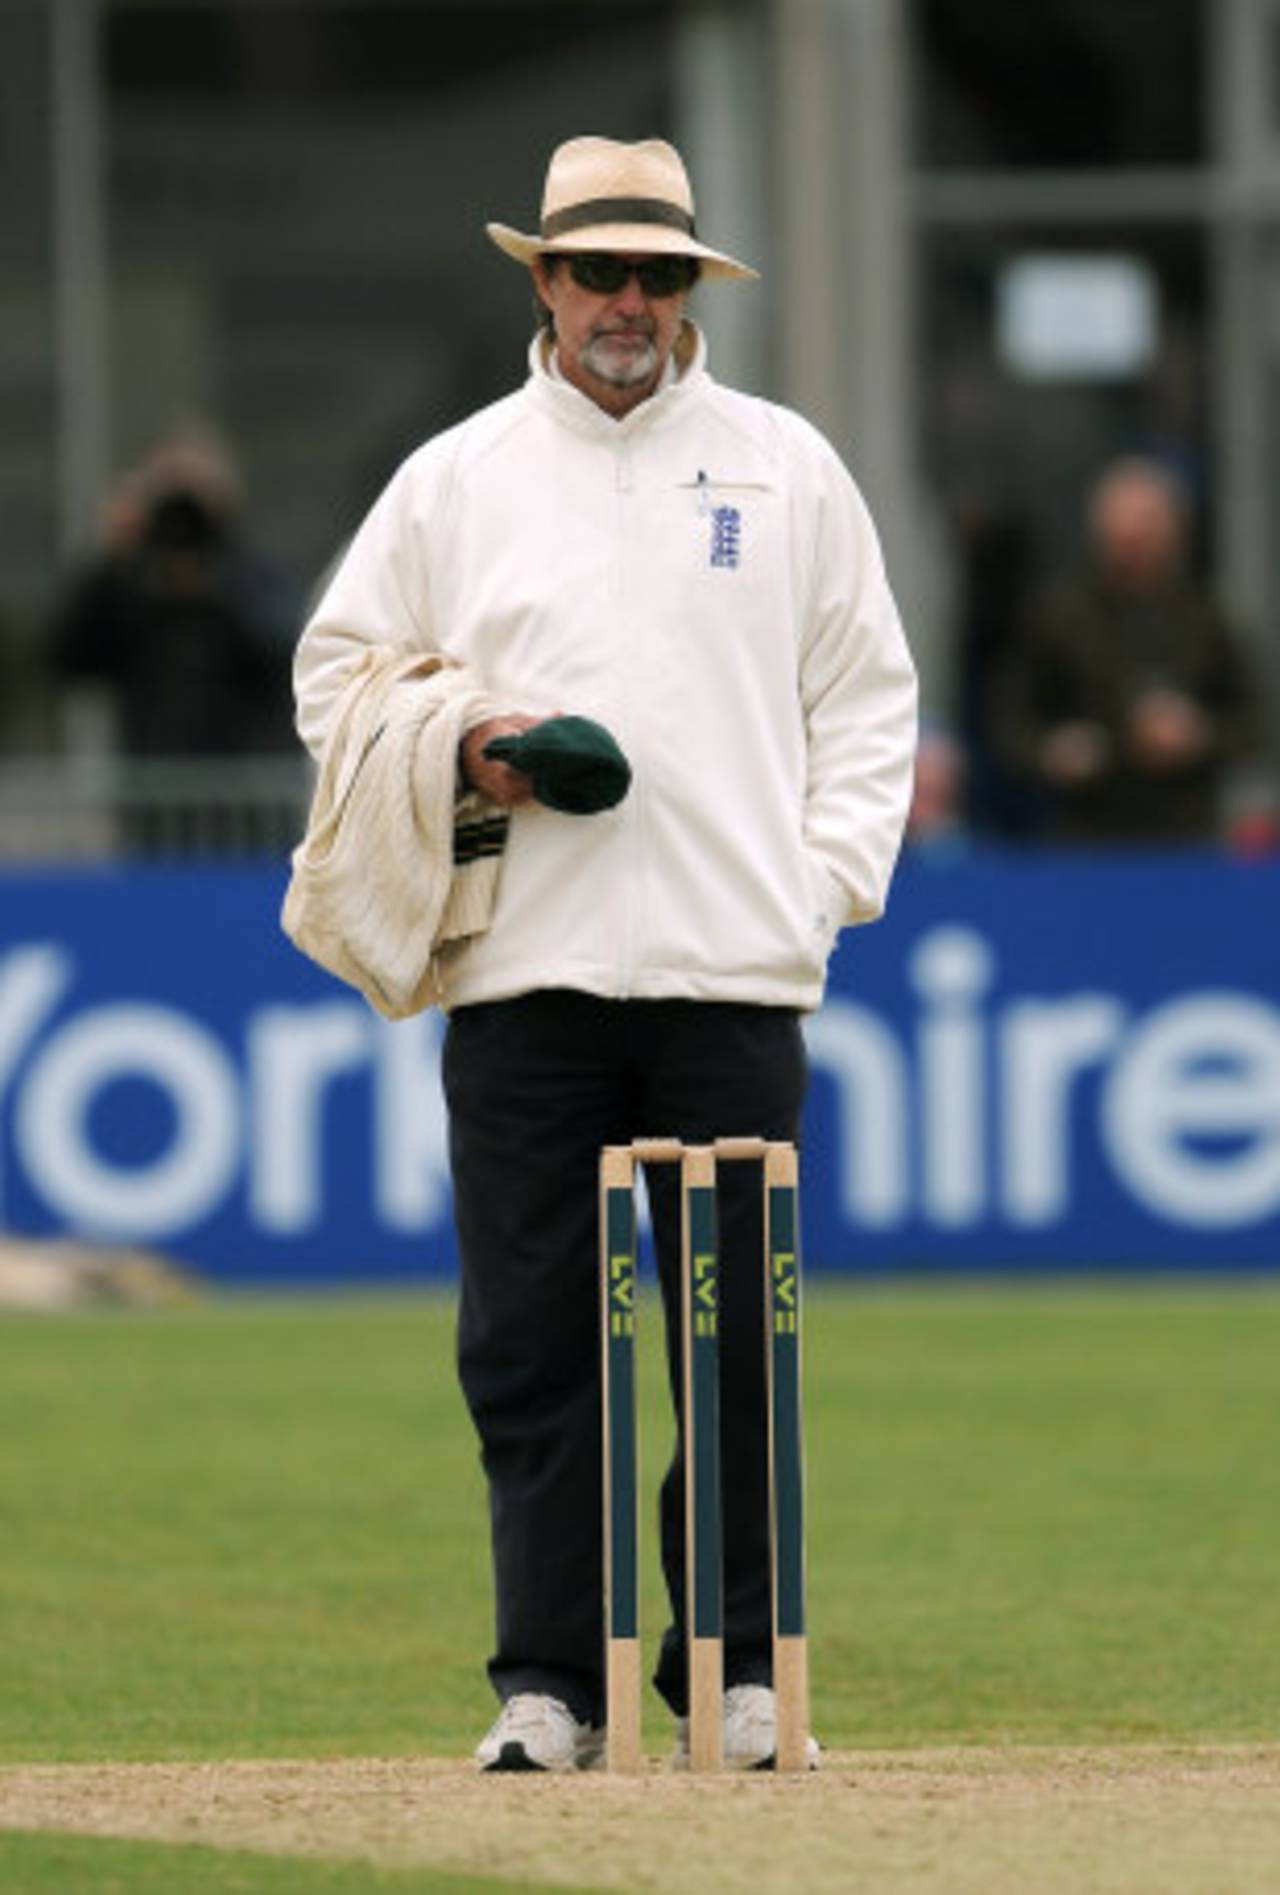 Peter Willey officiates, Gloucestershire v Australia A, Tour match, Bristol, 2nd day, June 22, 2014